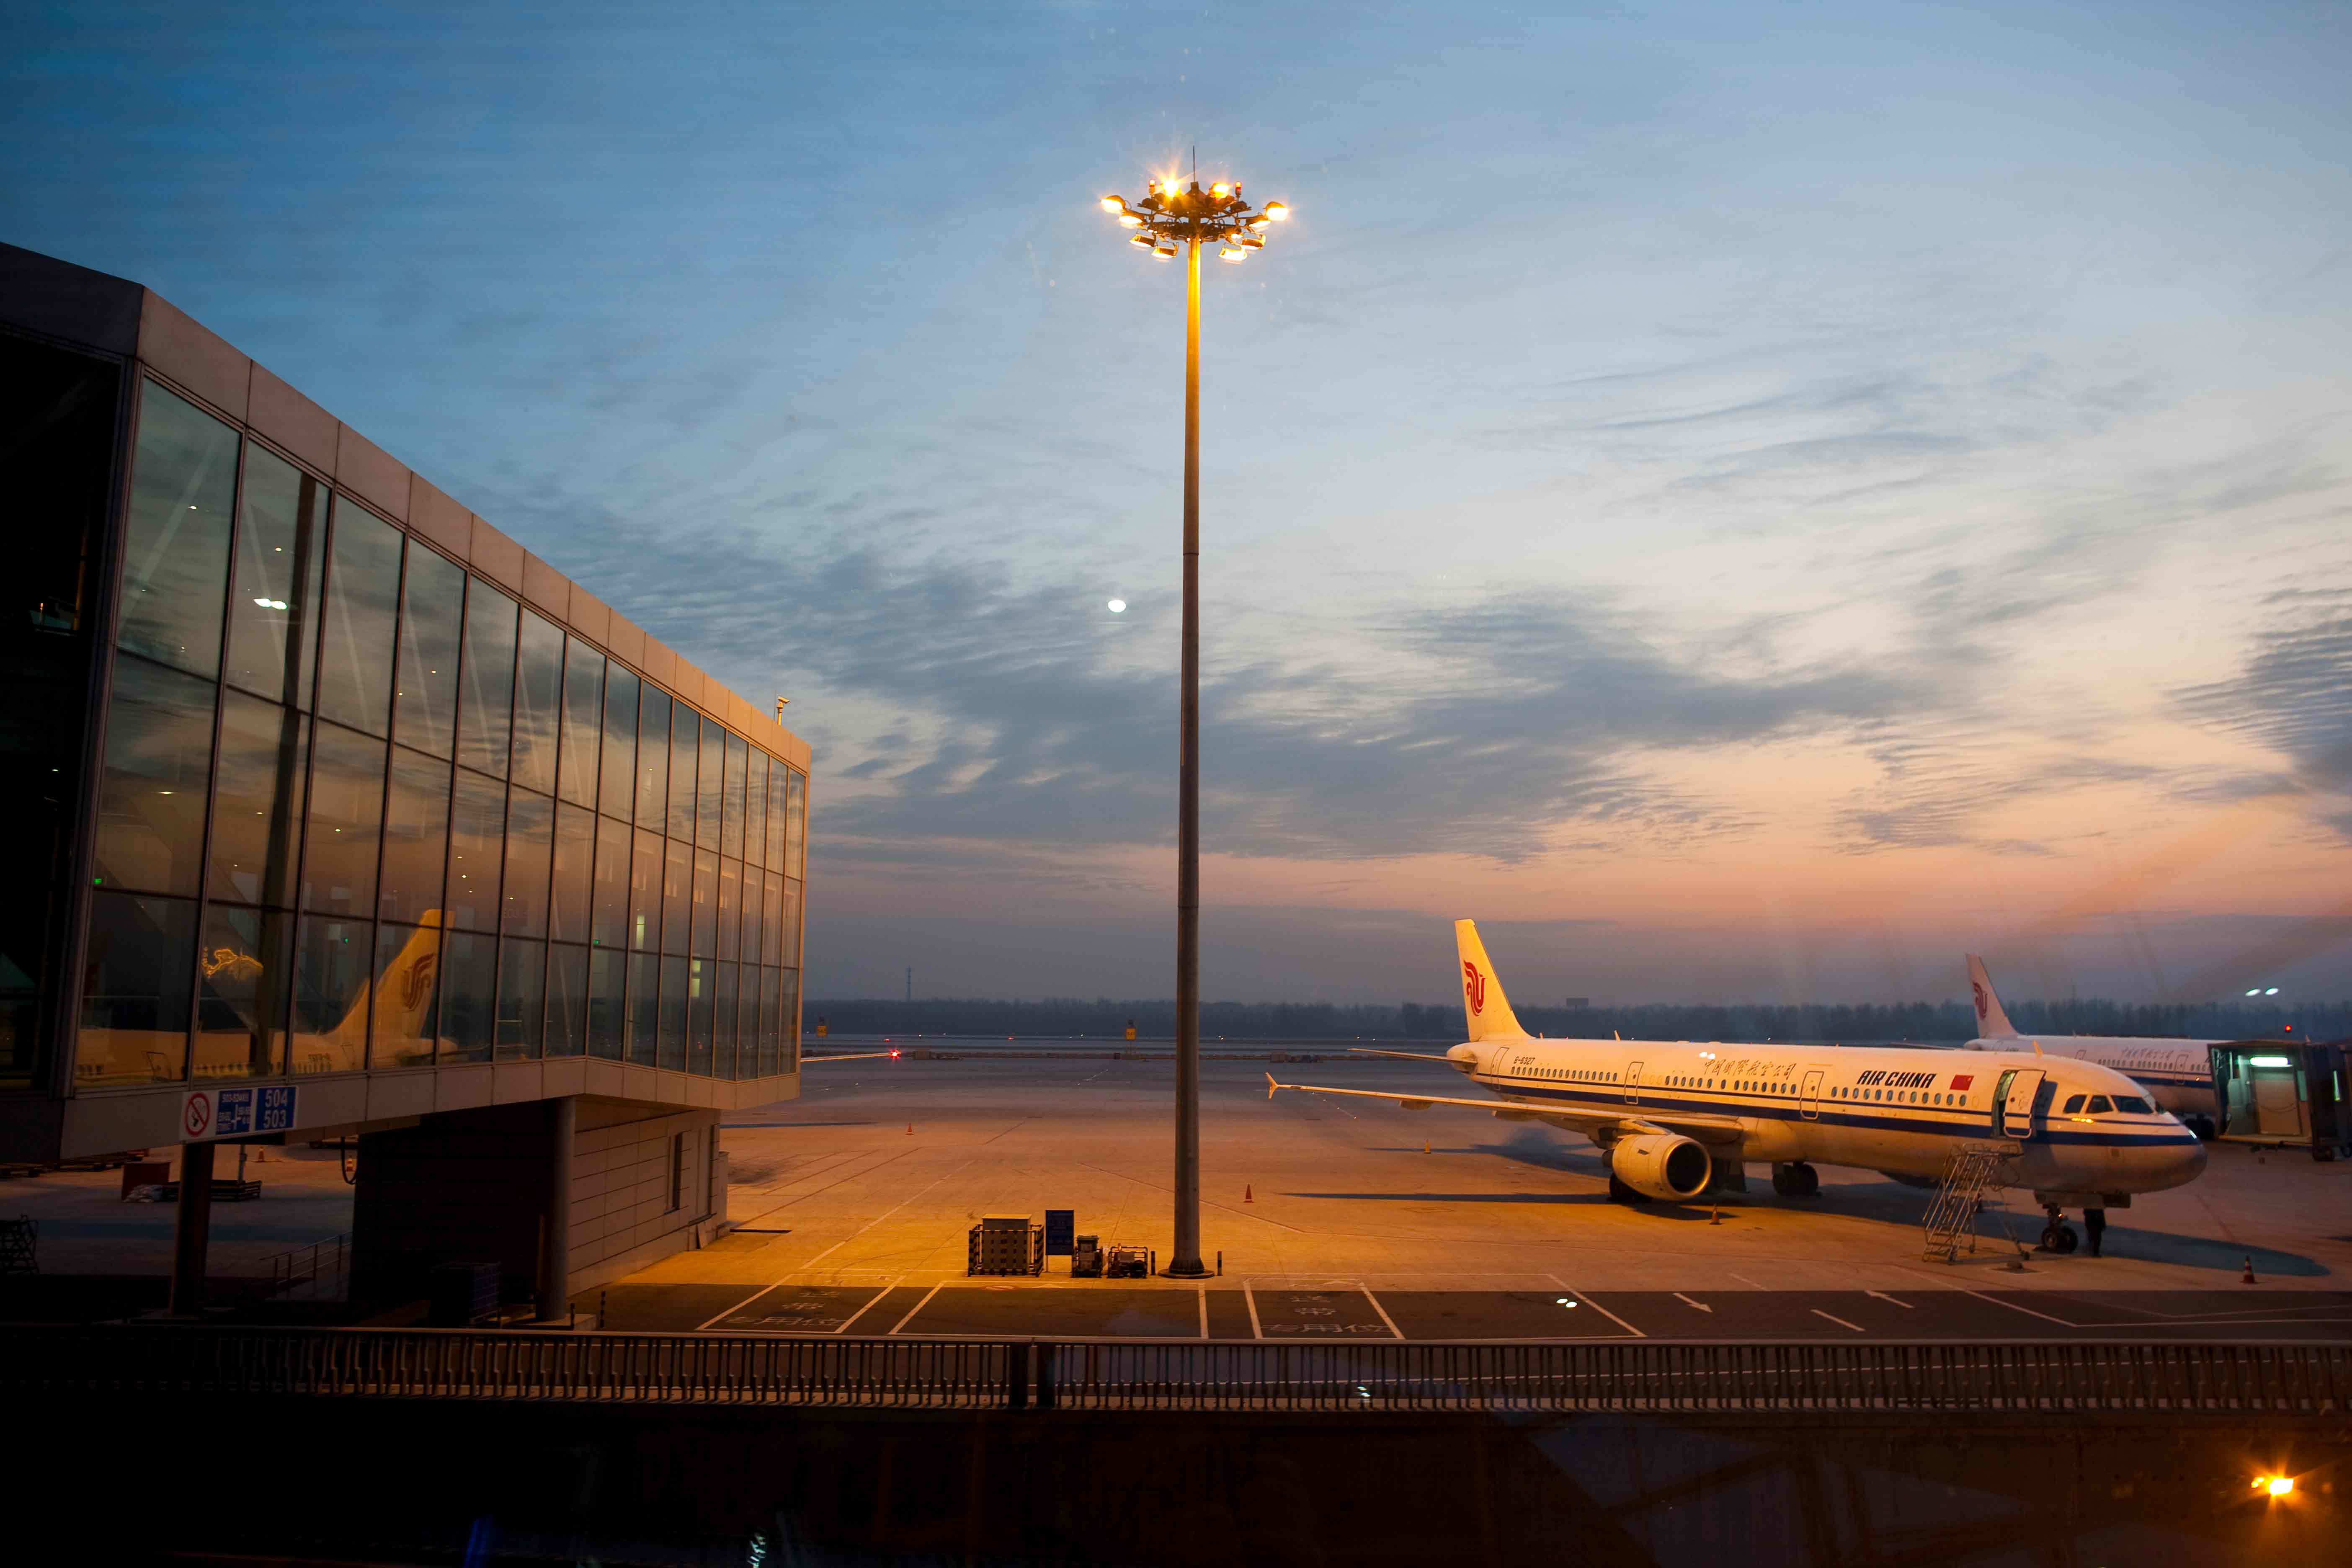 New Survey Shows that Business Travellers Look to their Employers for Health and Safety